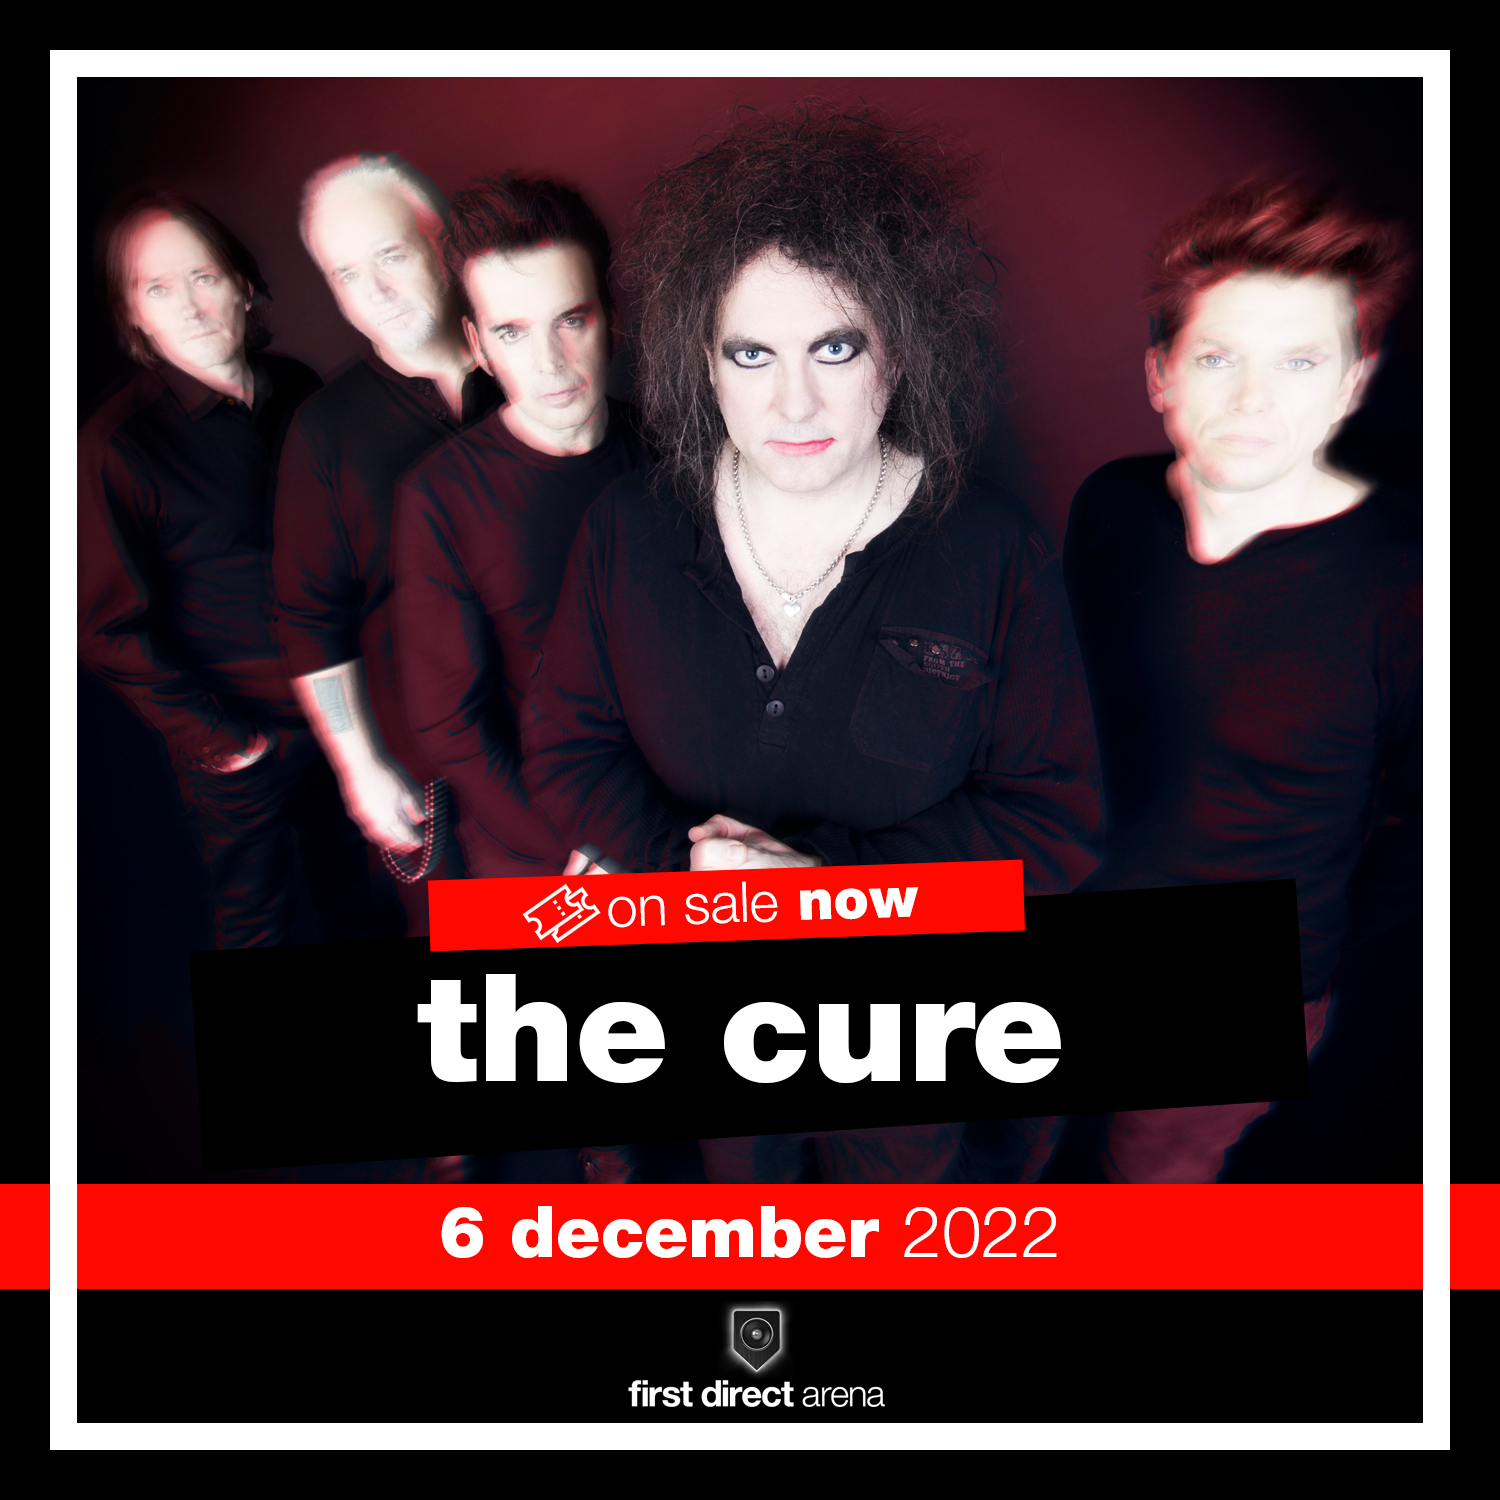 20221206-leeds-uk-advert-from-first-direct-arena-fb-on-sale-now